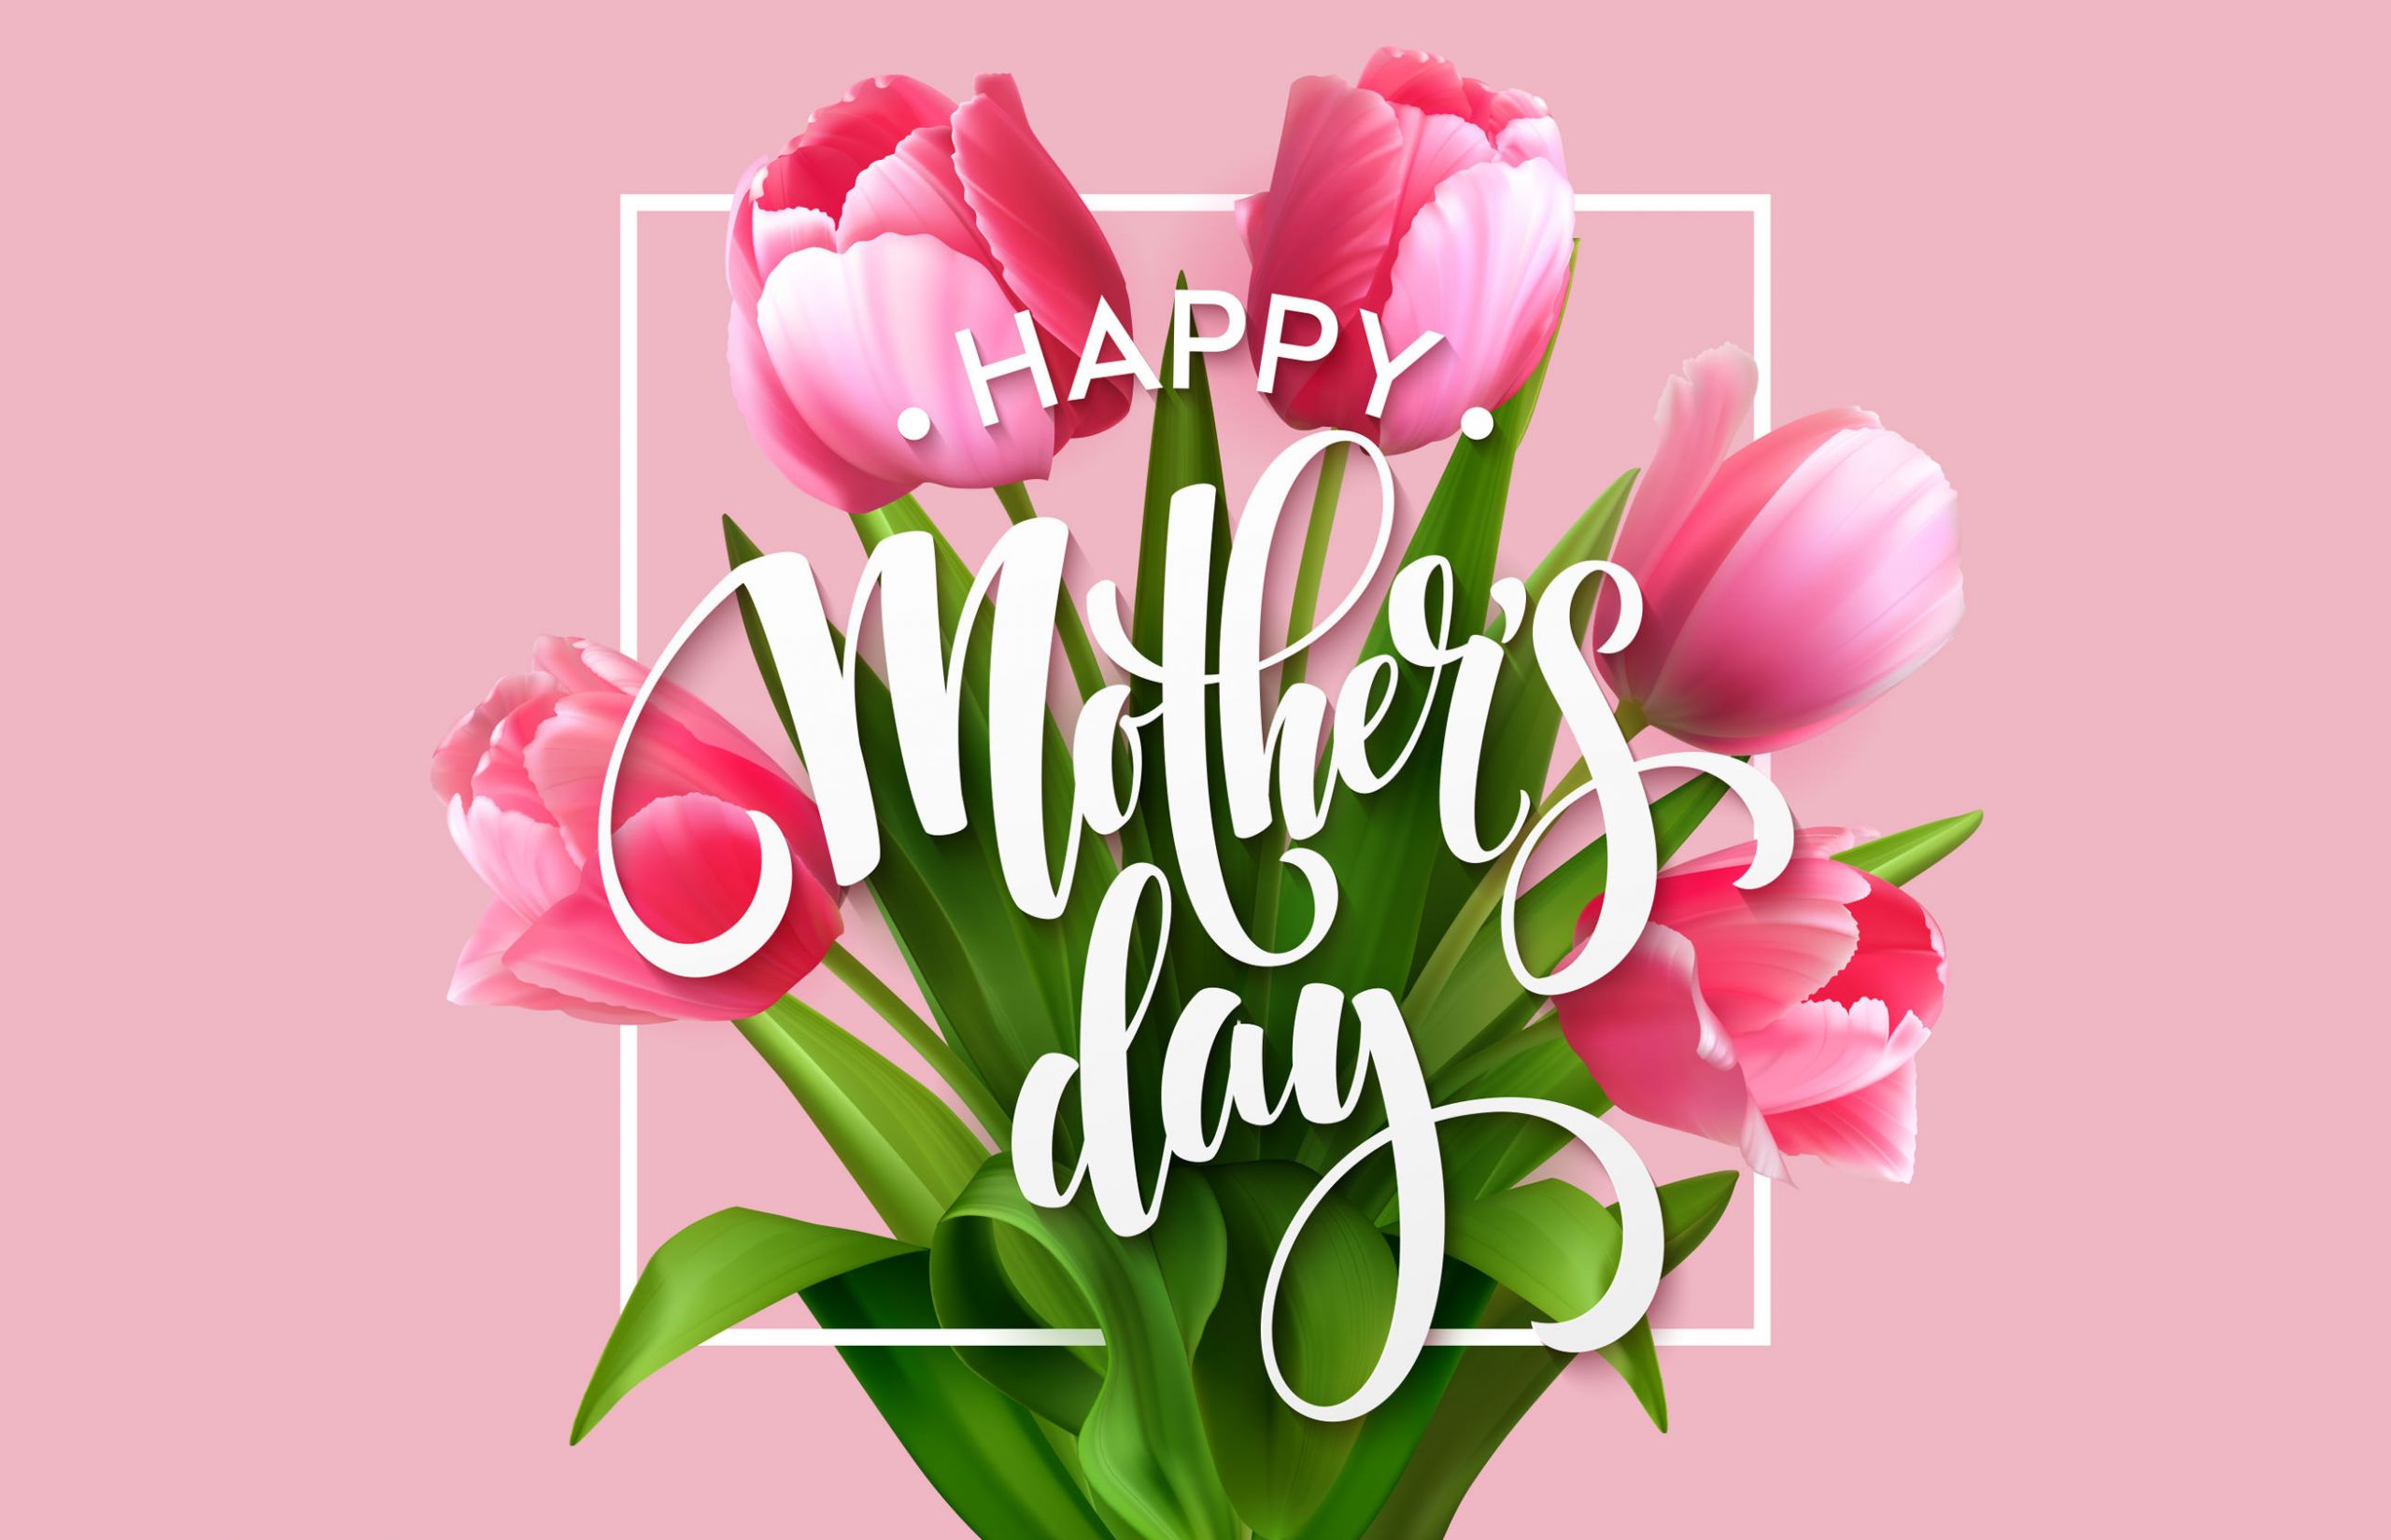 Happy Mothers Day Picture Quotes
 60 Inspirational Dear Mom And Happy Mother s Day Quotes